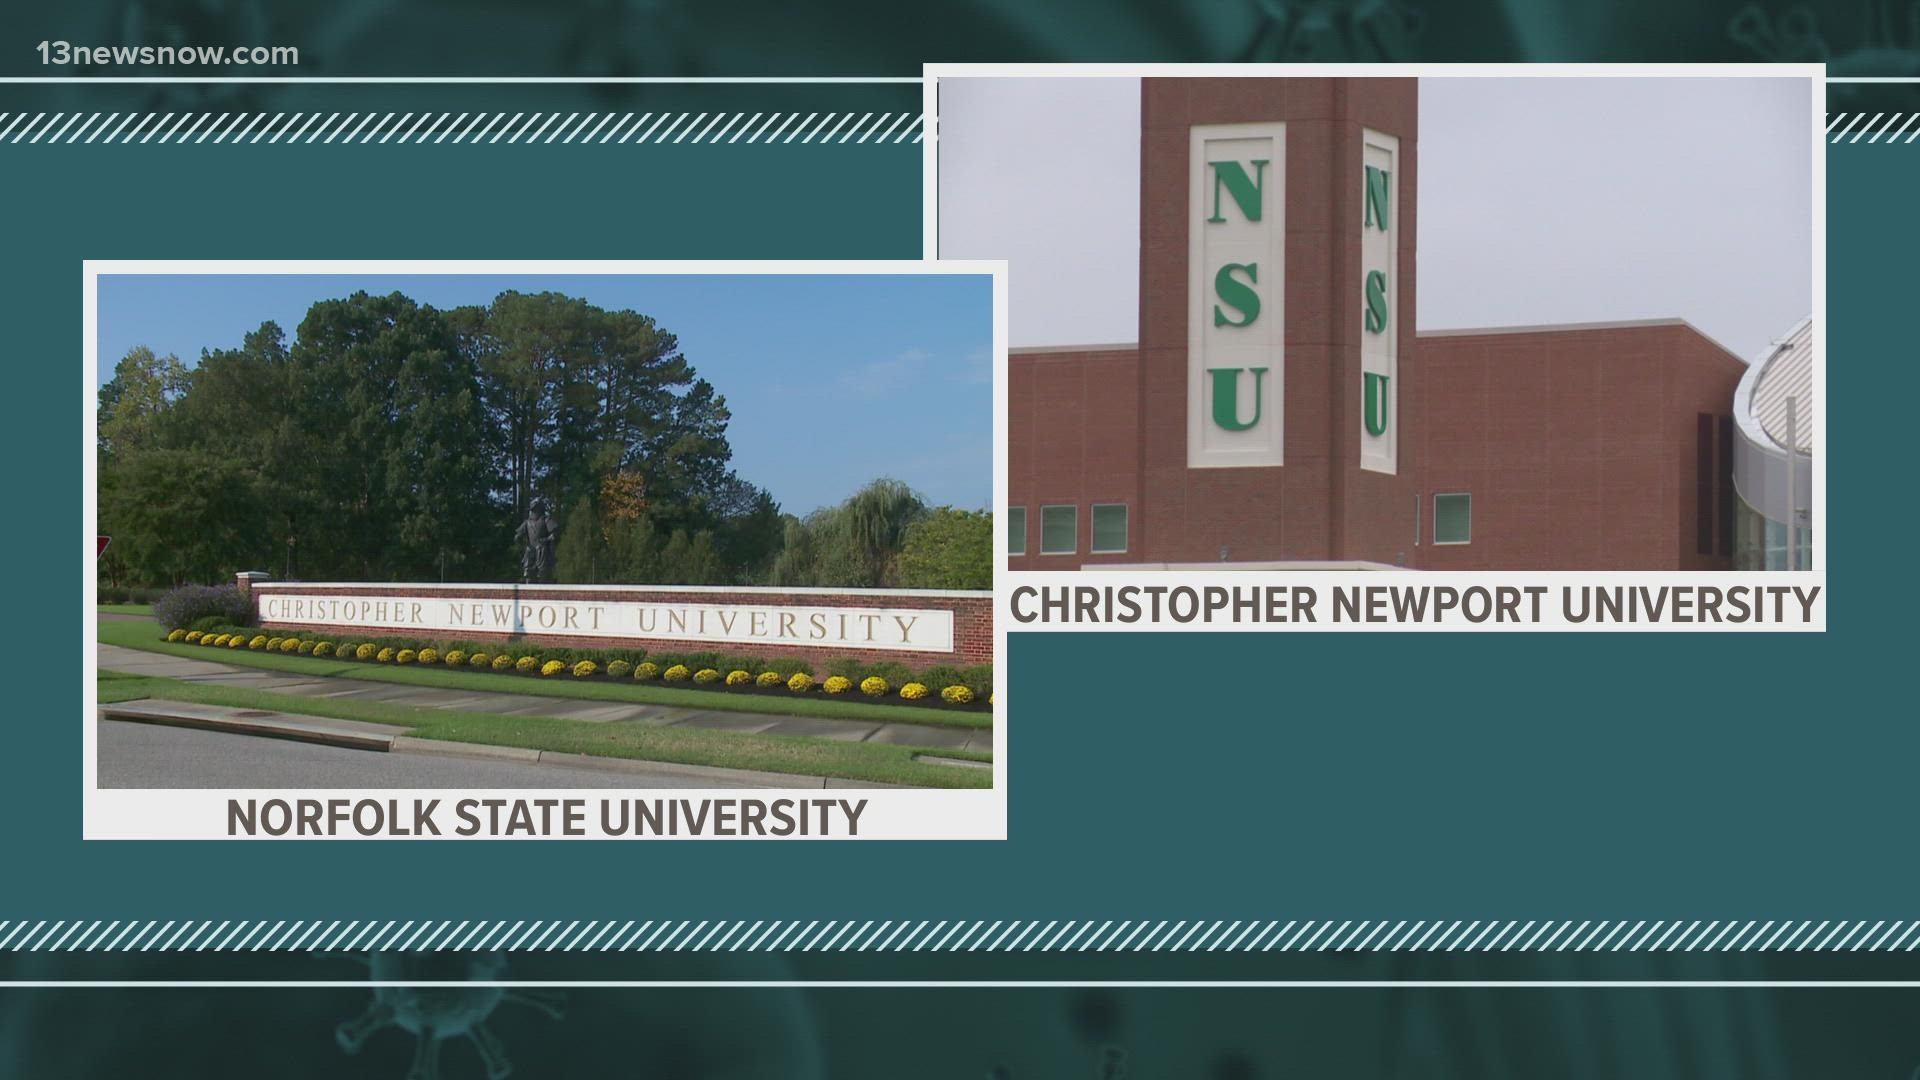 Norfolk State University announced Tuesday that all students and staff are required to get a COVID-19 booster shot no later than February 4.